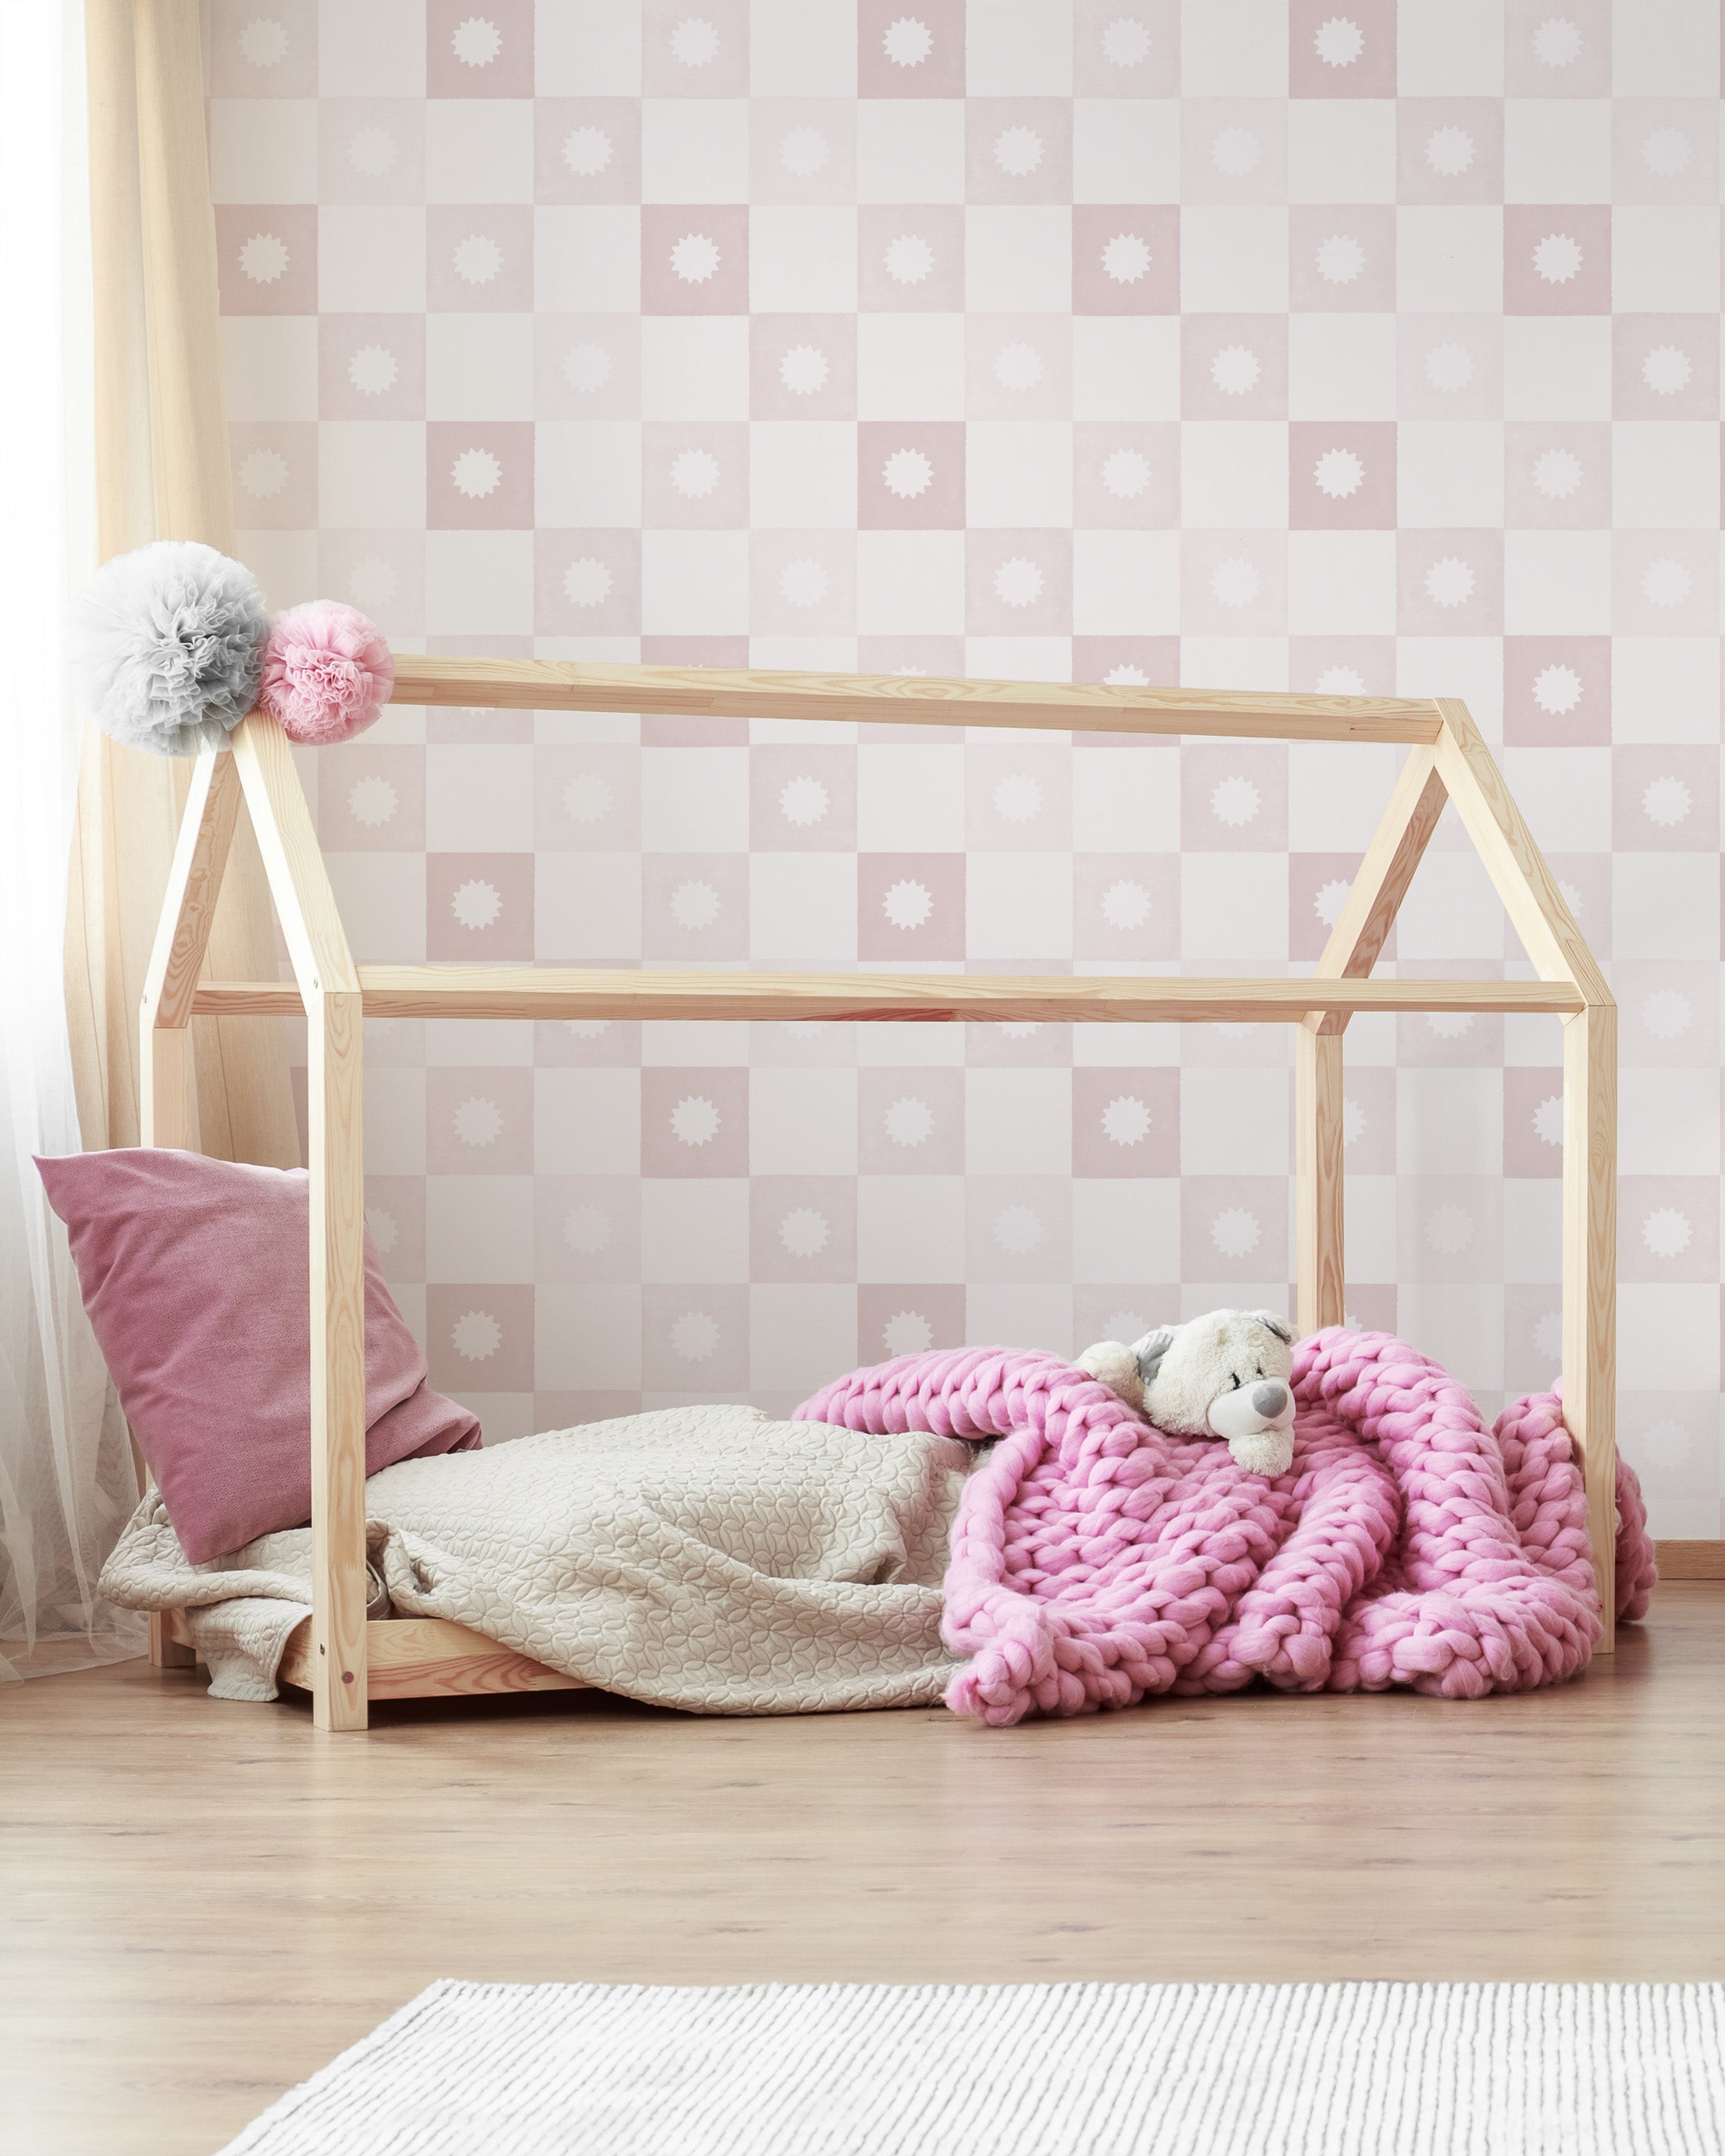 A charming children's room with a wooden frame bed set against a backdrop of pink and white checkered wallpaper. The room is decorated with soft pink cushions, a thick pink knit blanket, and stuffed toys, creating a cozy and inviting space.